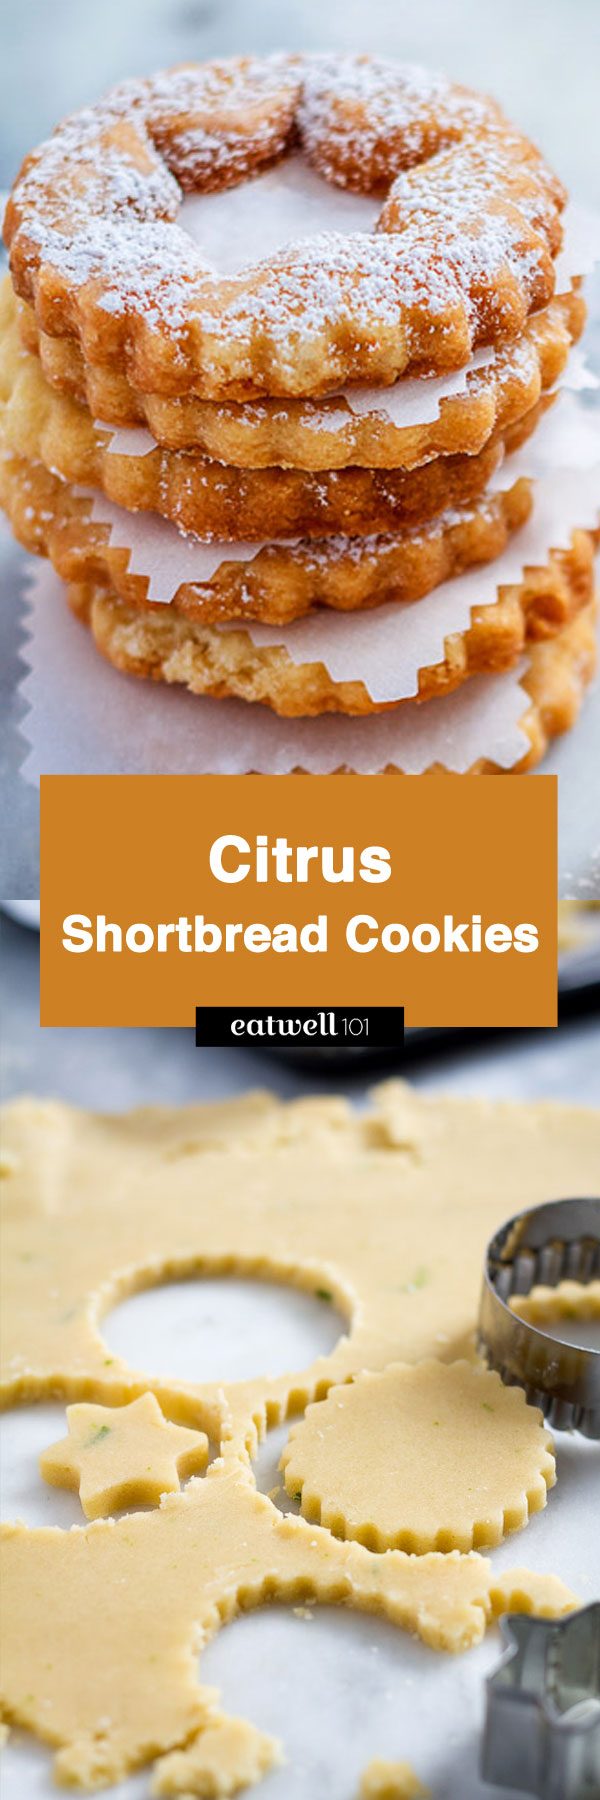 These Citrus Shortbread Cookies are just irresistible and we guarantee they won't last long on your counter or coffee table.